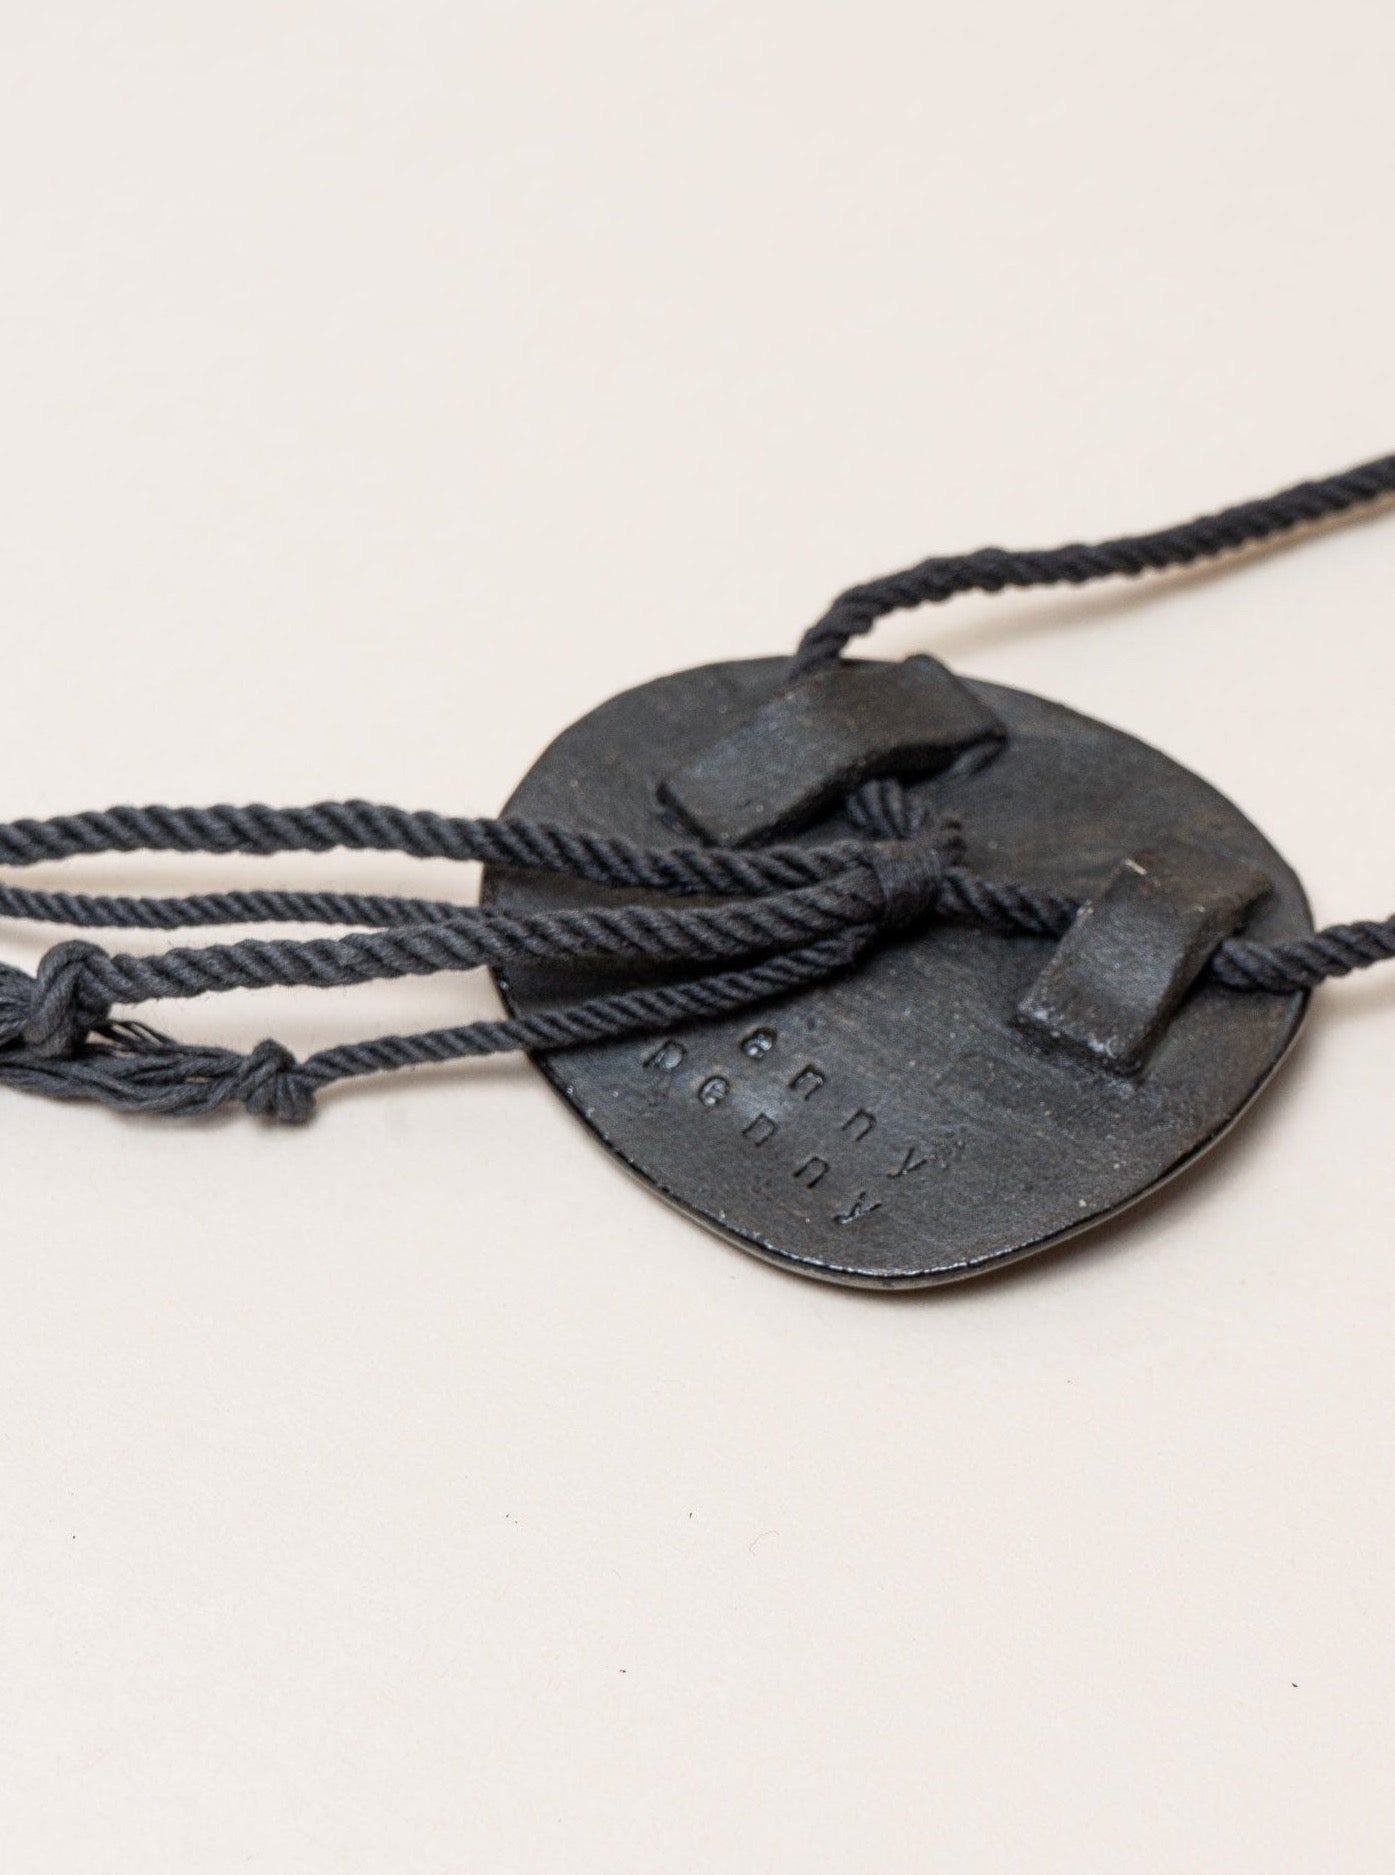 A handmade Edena Necklace crafted by an artist, with a rope attached to it.